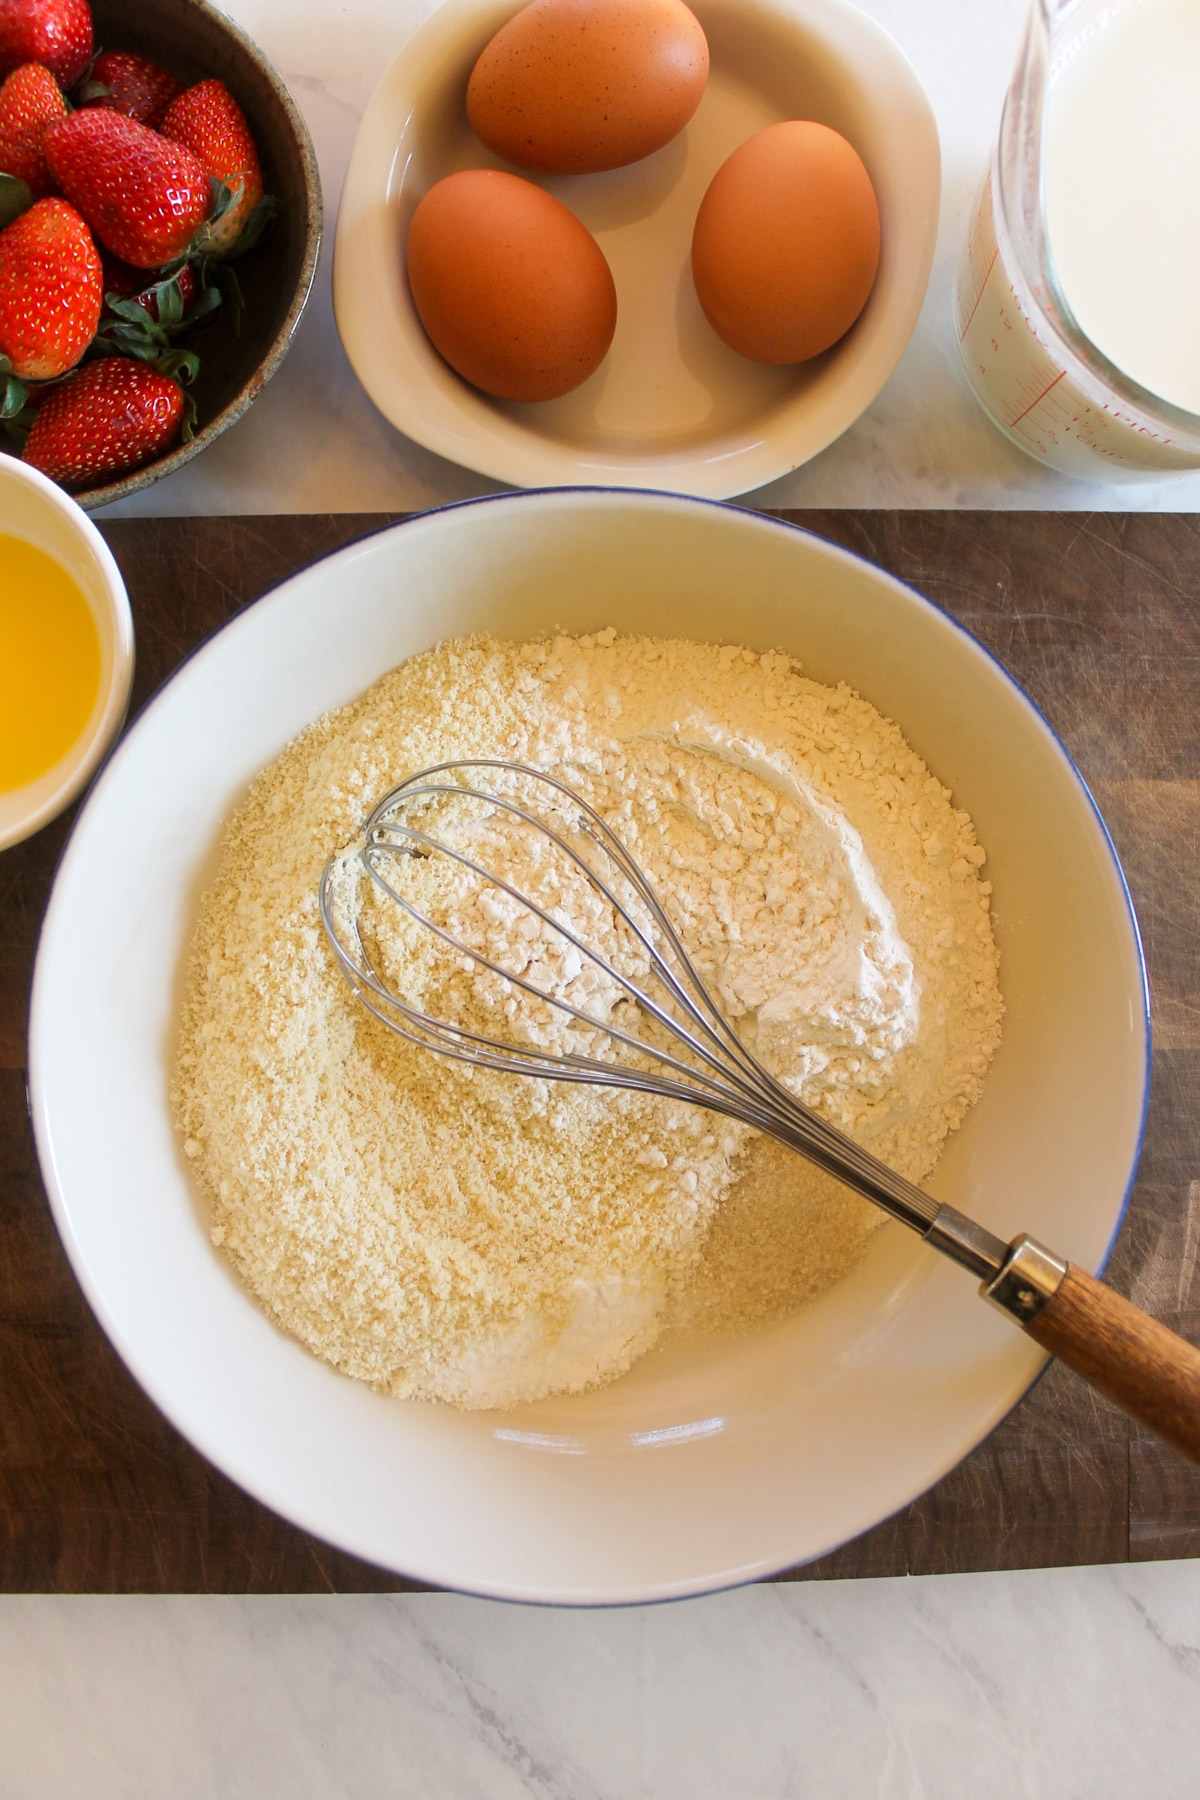 Mixing the dry pancake ingredients in a bowl with a whisk.